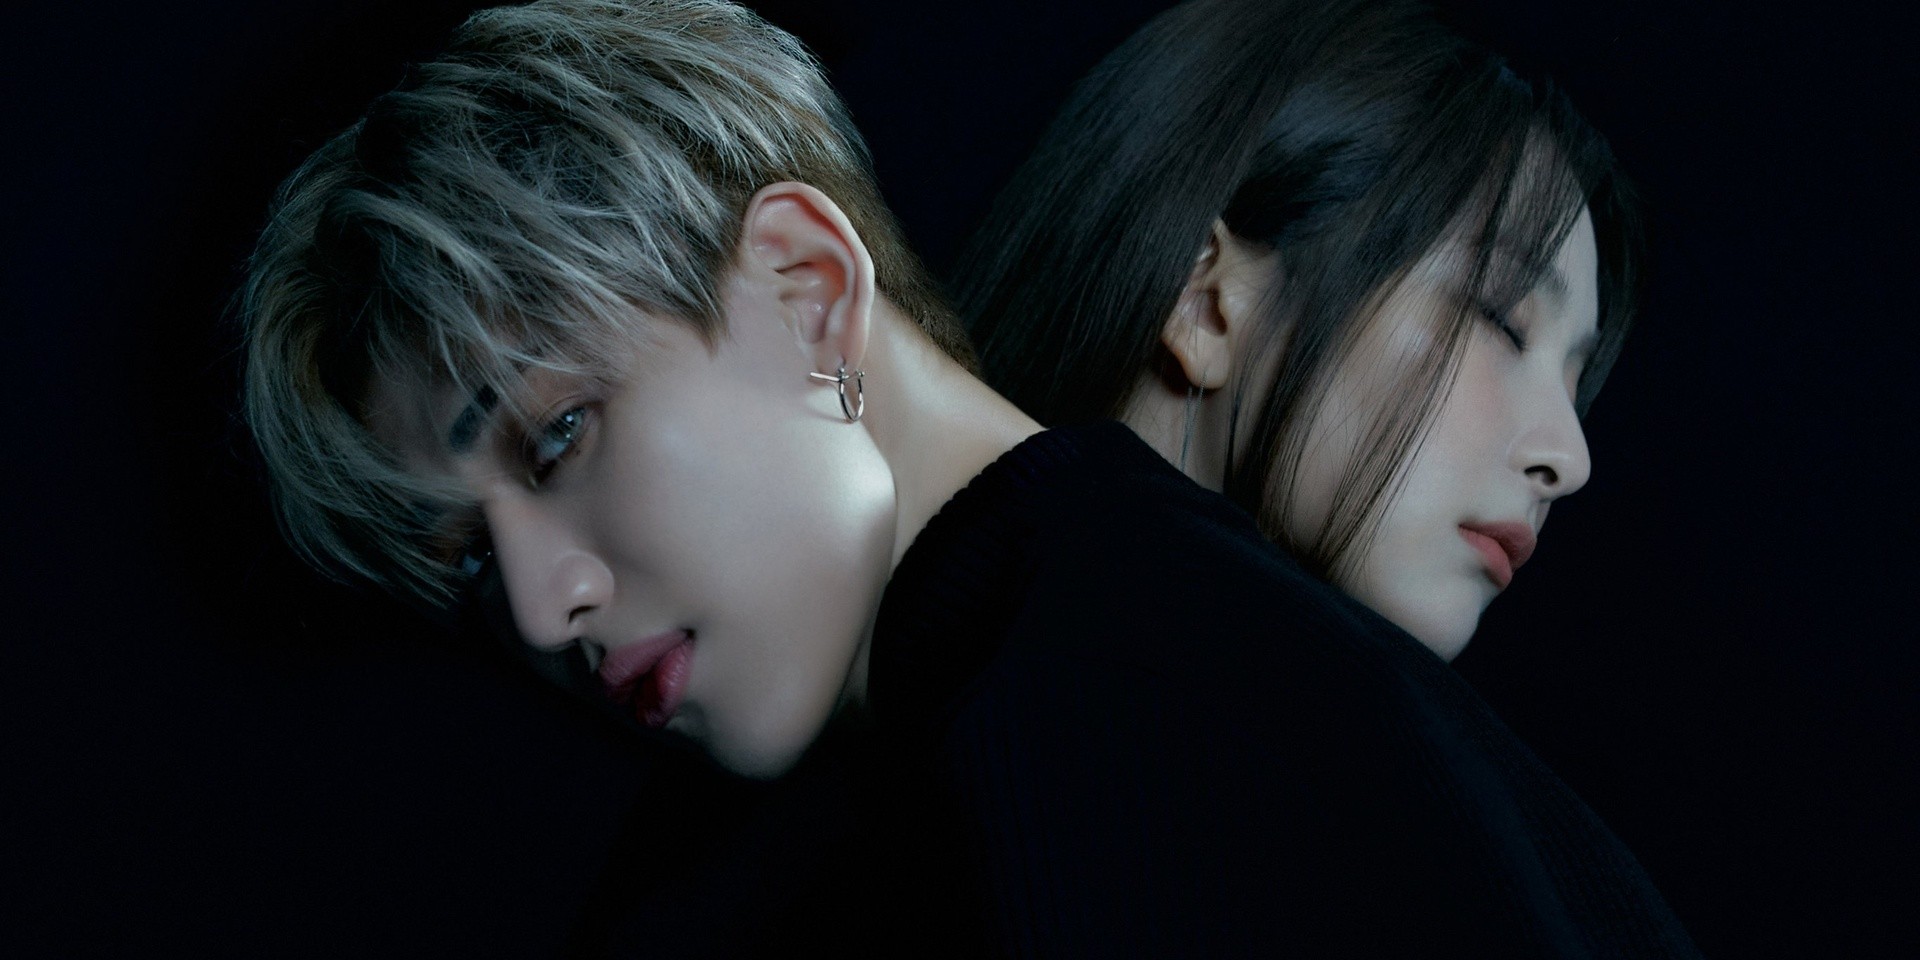 BamBam announces new song 'Who Are You' featuring Red Velvet's Seulgi